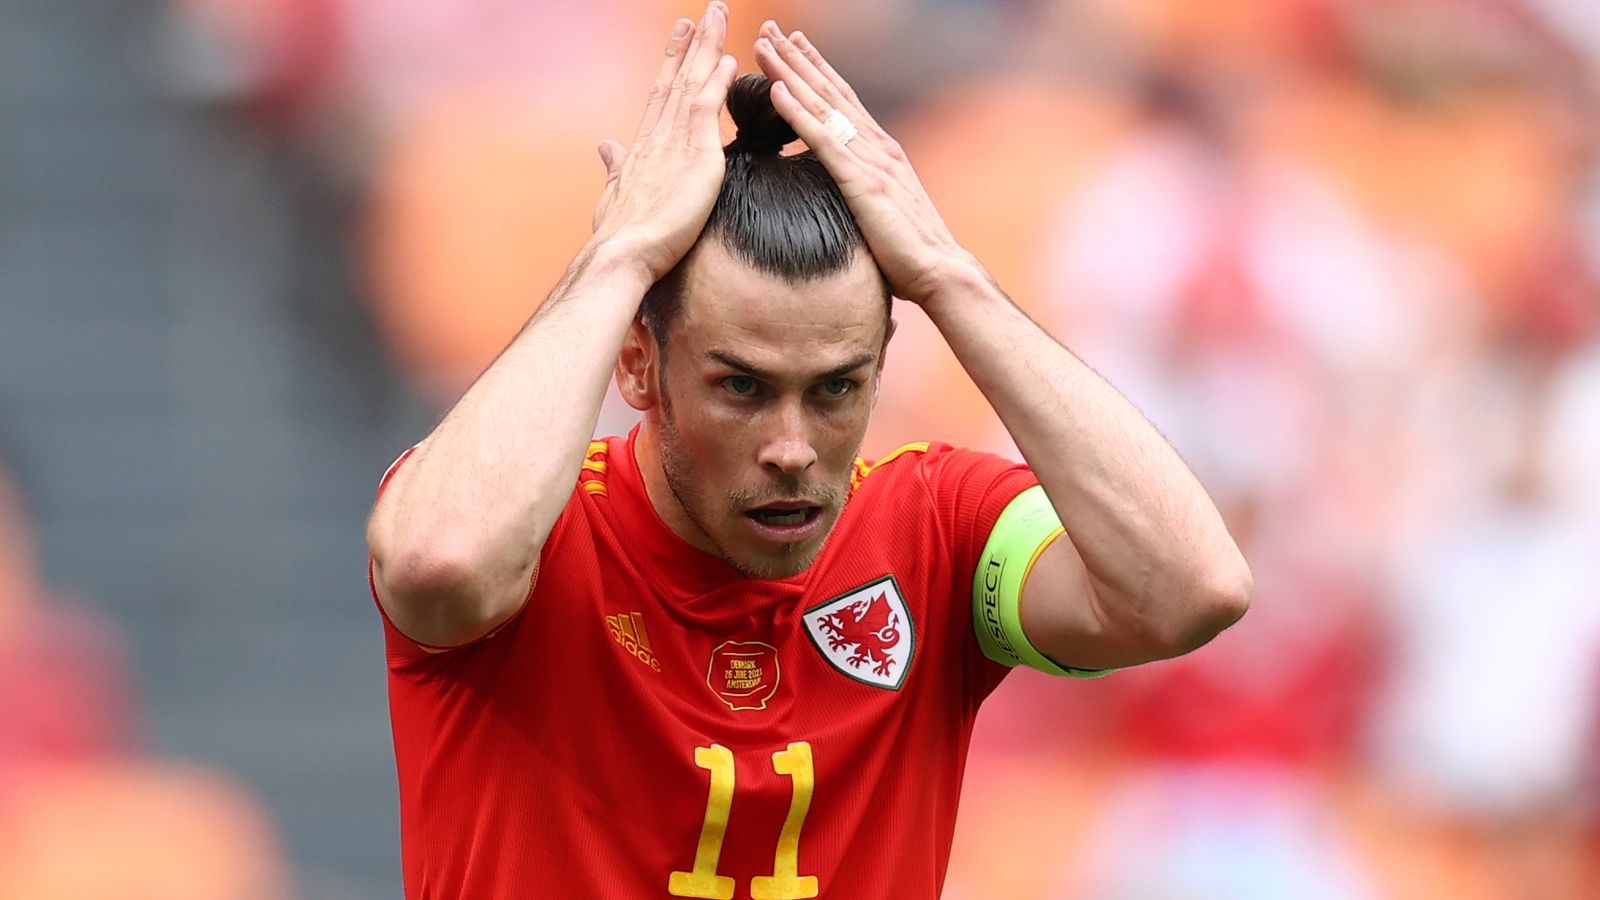 Gareth Bale: Wales forward ignores question on future following Euro 2020 exit | Football News ...